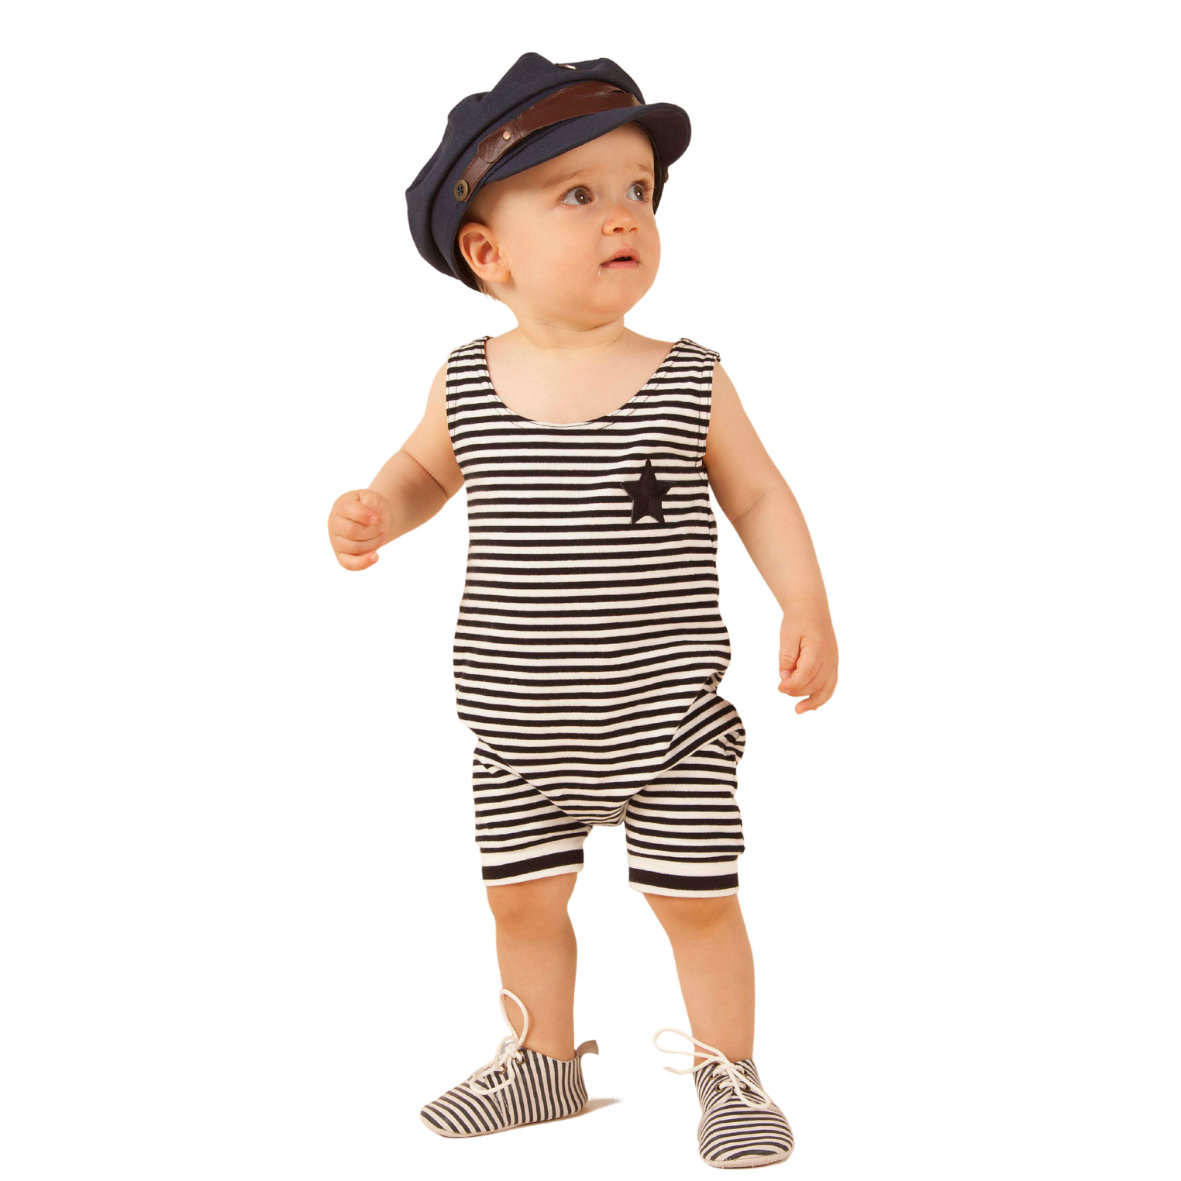 Black and white star and stripe muscle playsuit romper